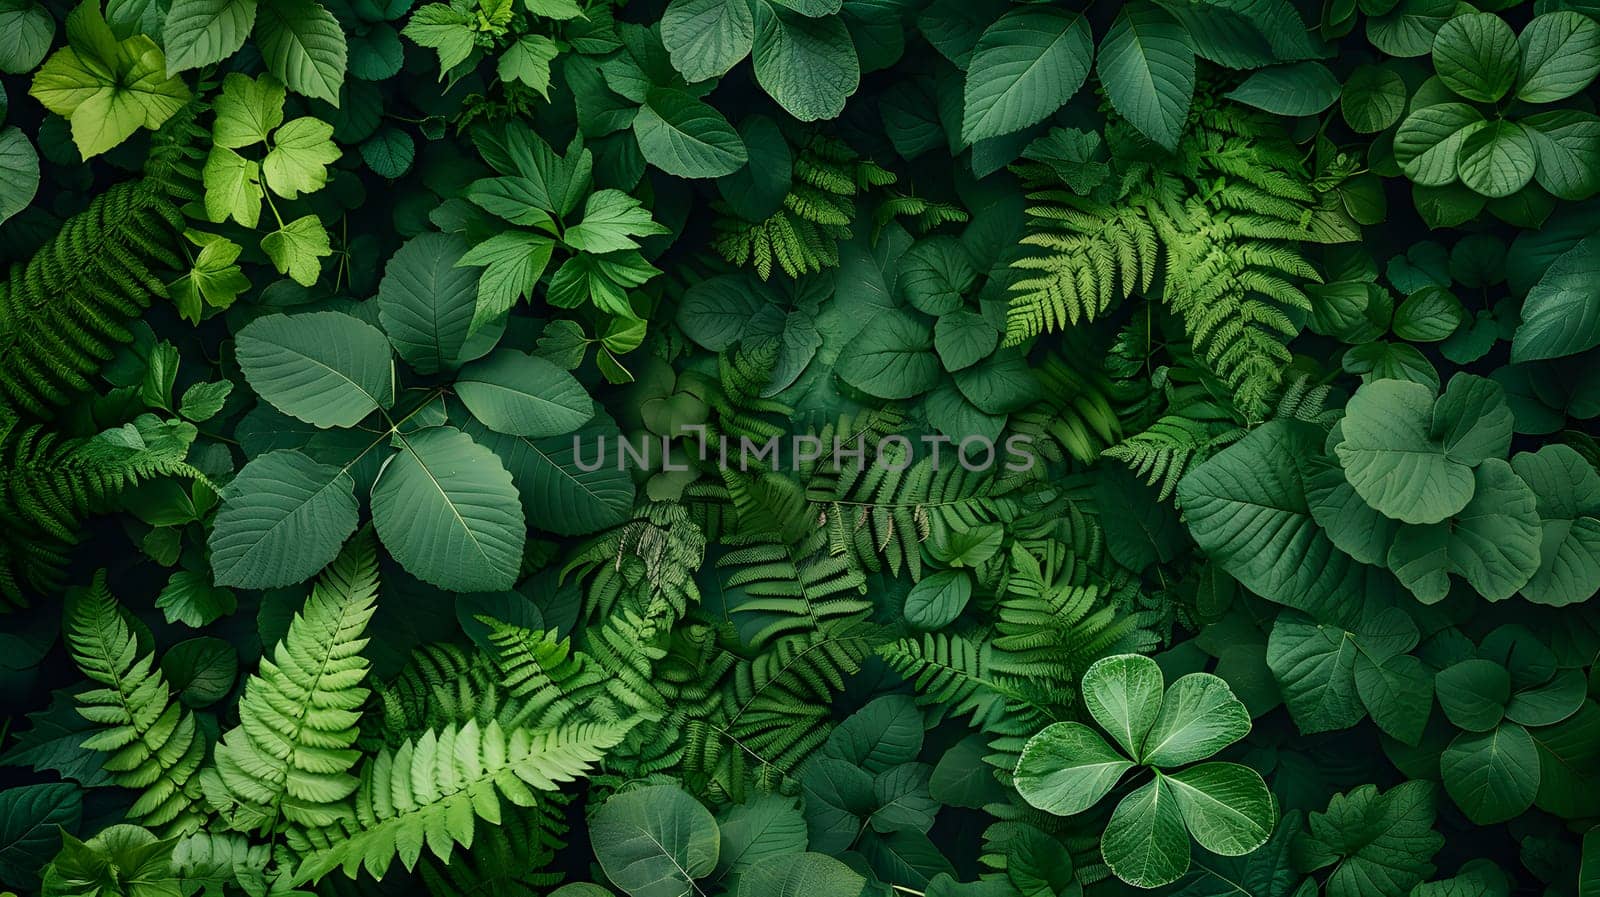 a close up of a bunch of green leaves on a wall by Nadtochiy